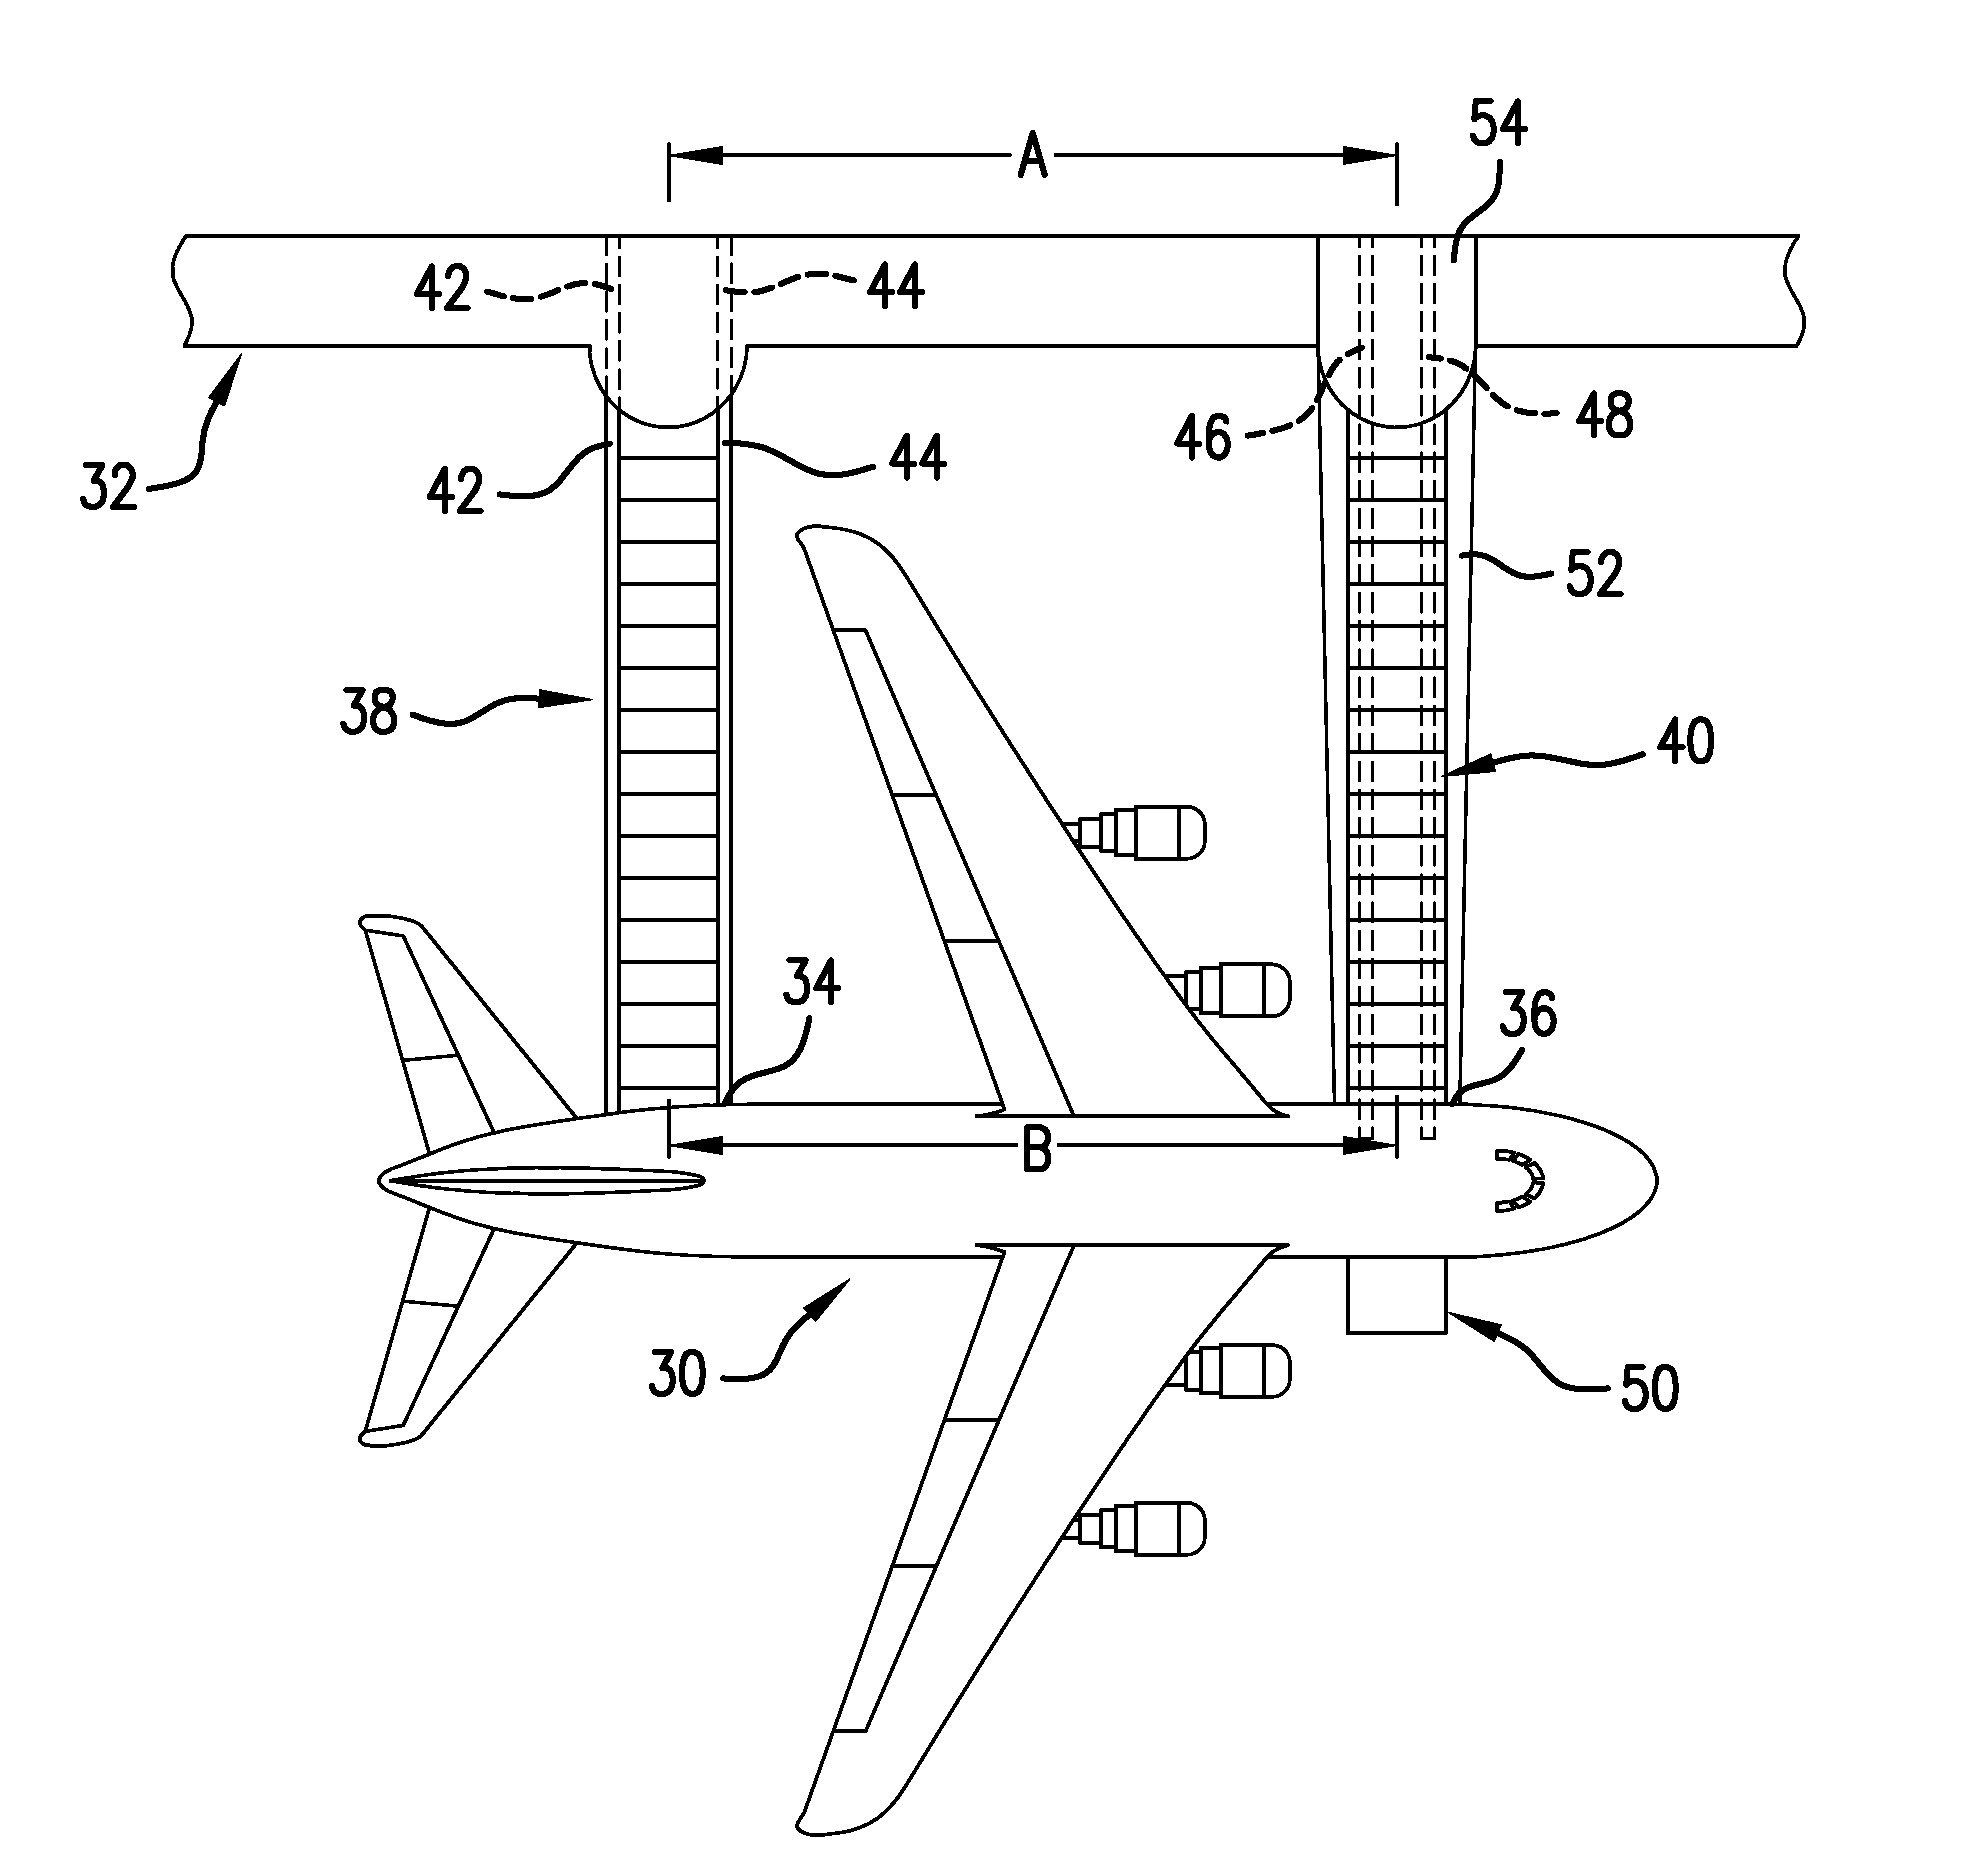 System and method for improving efficiency of aircraft gate services and turnaround